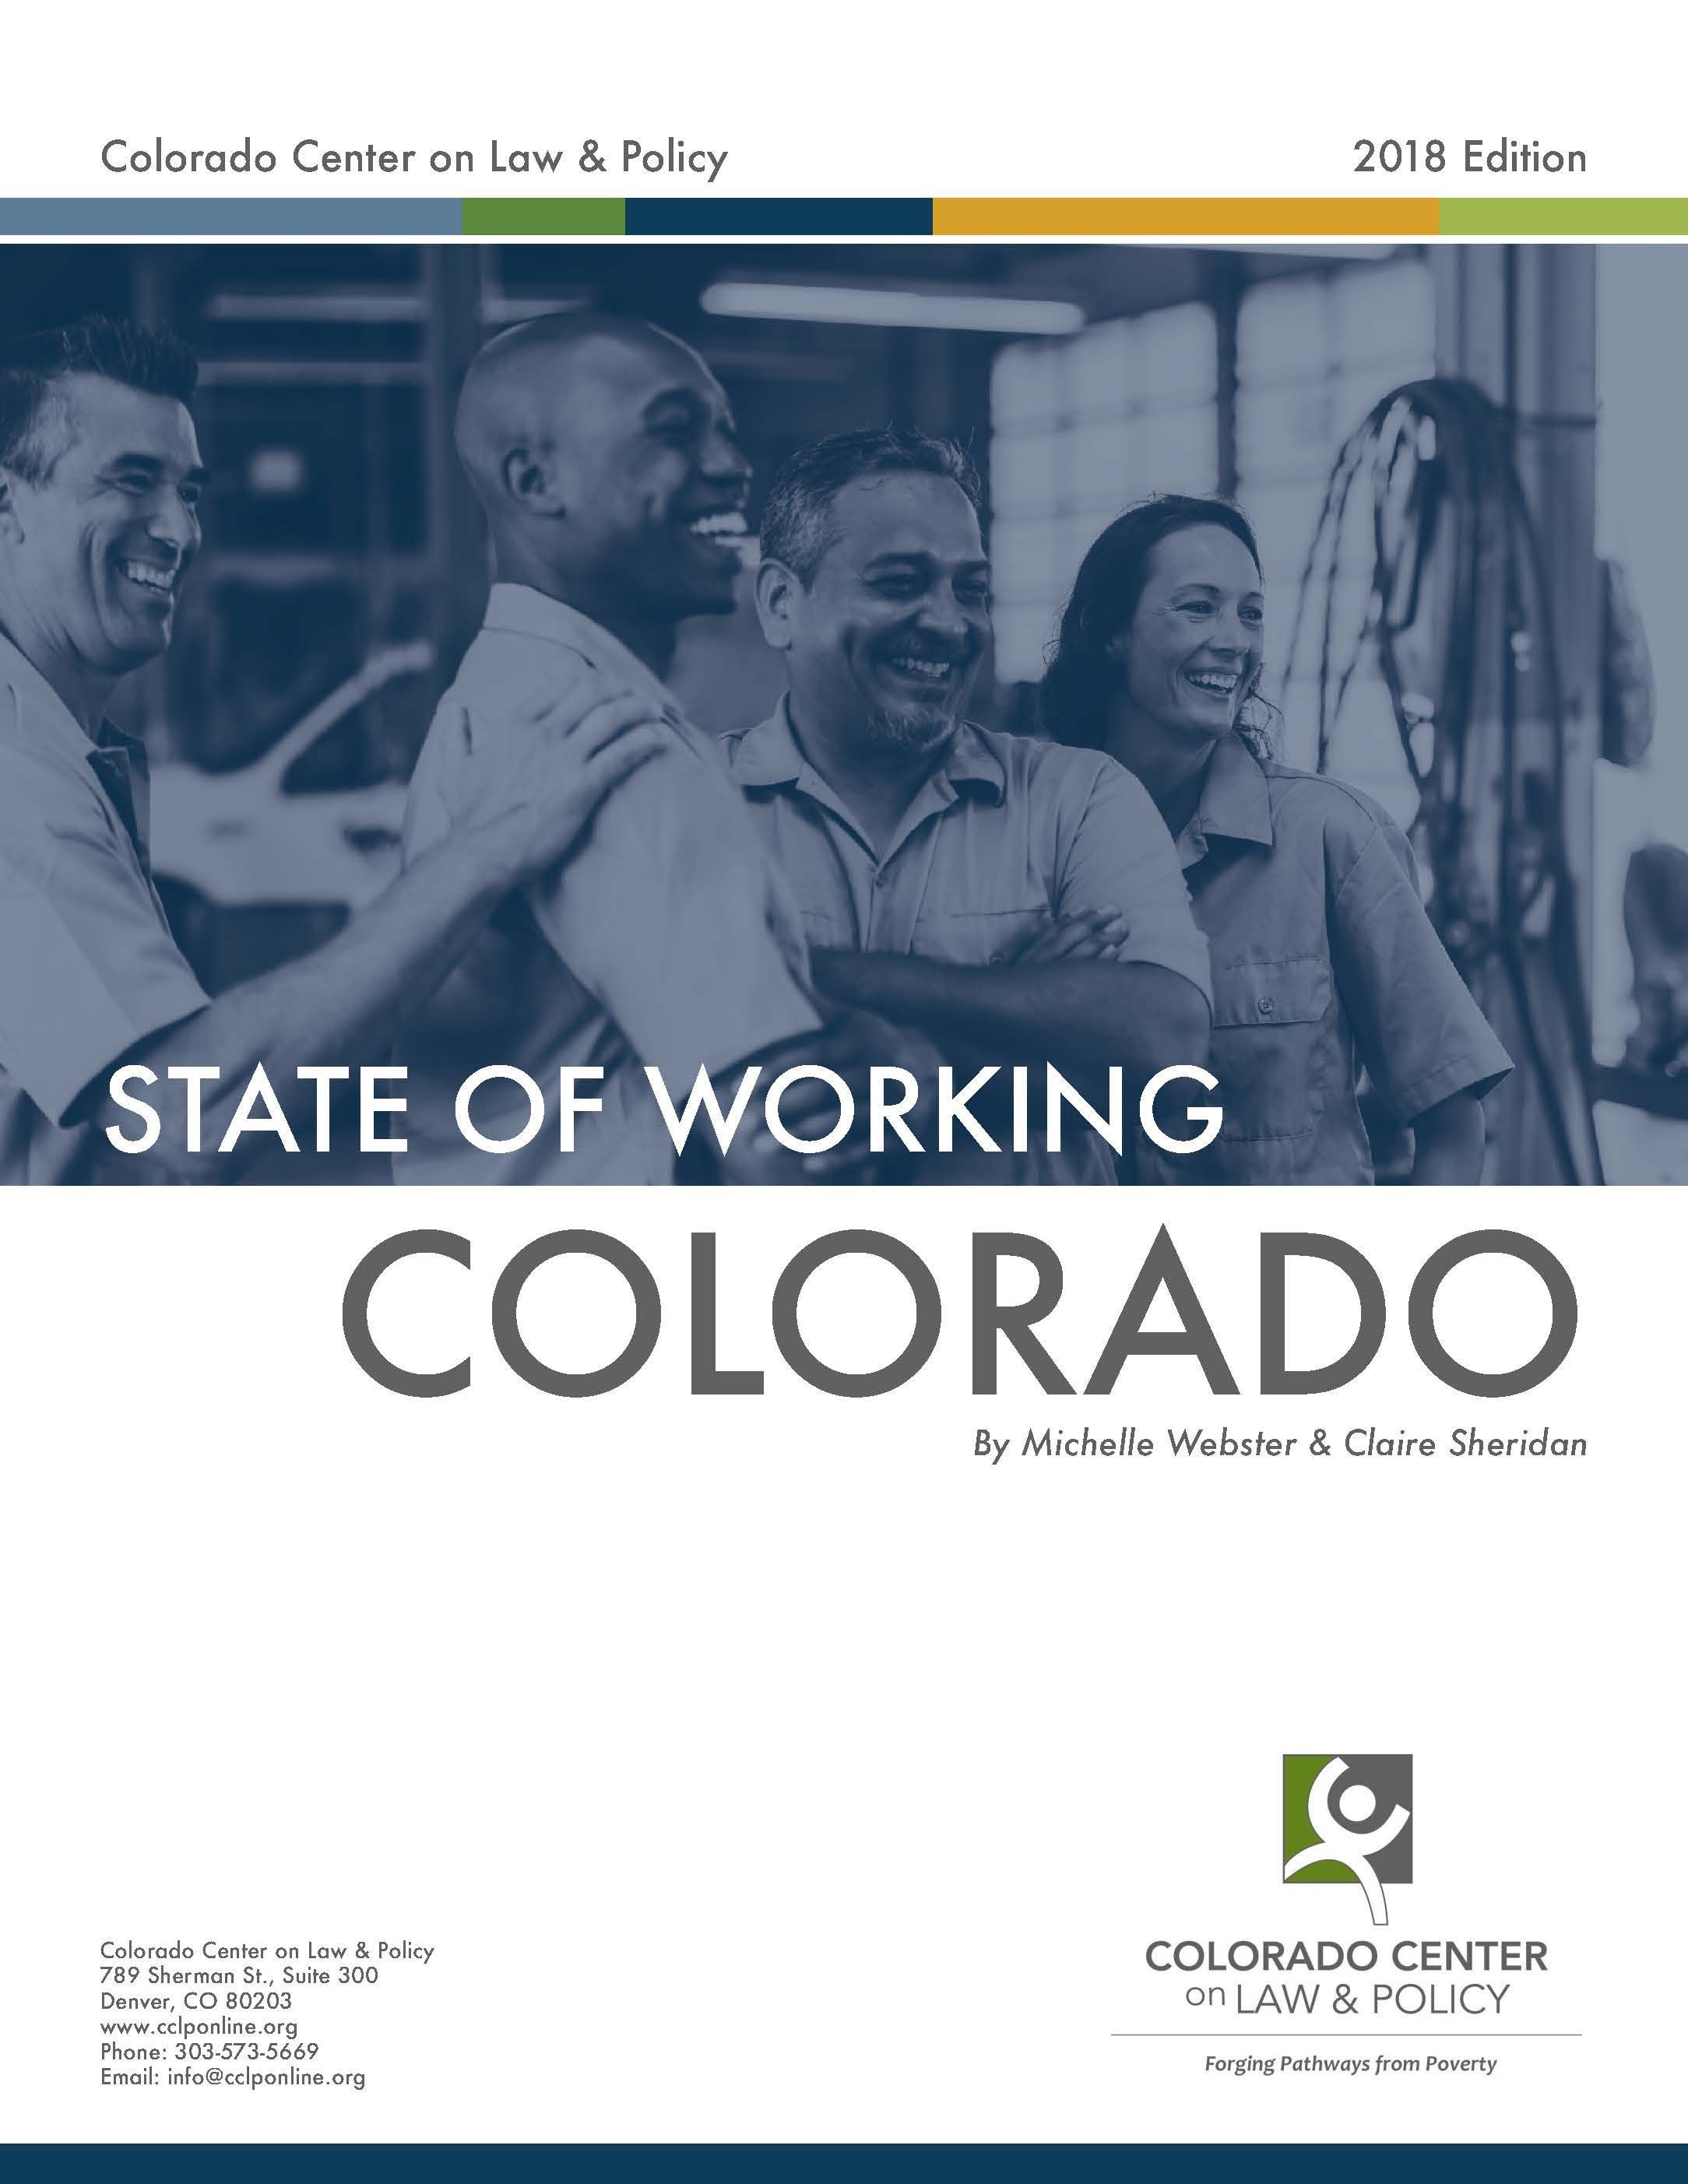 State of Working Colorado 2018